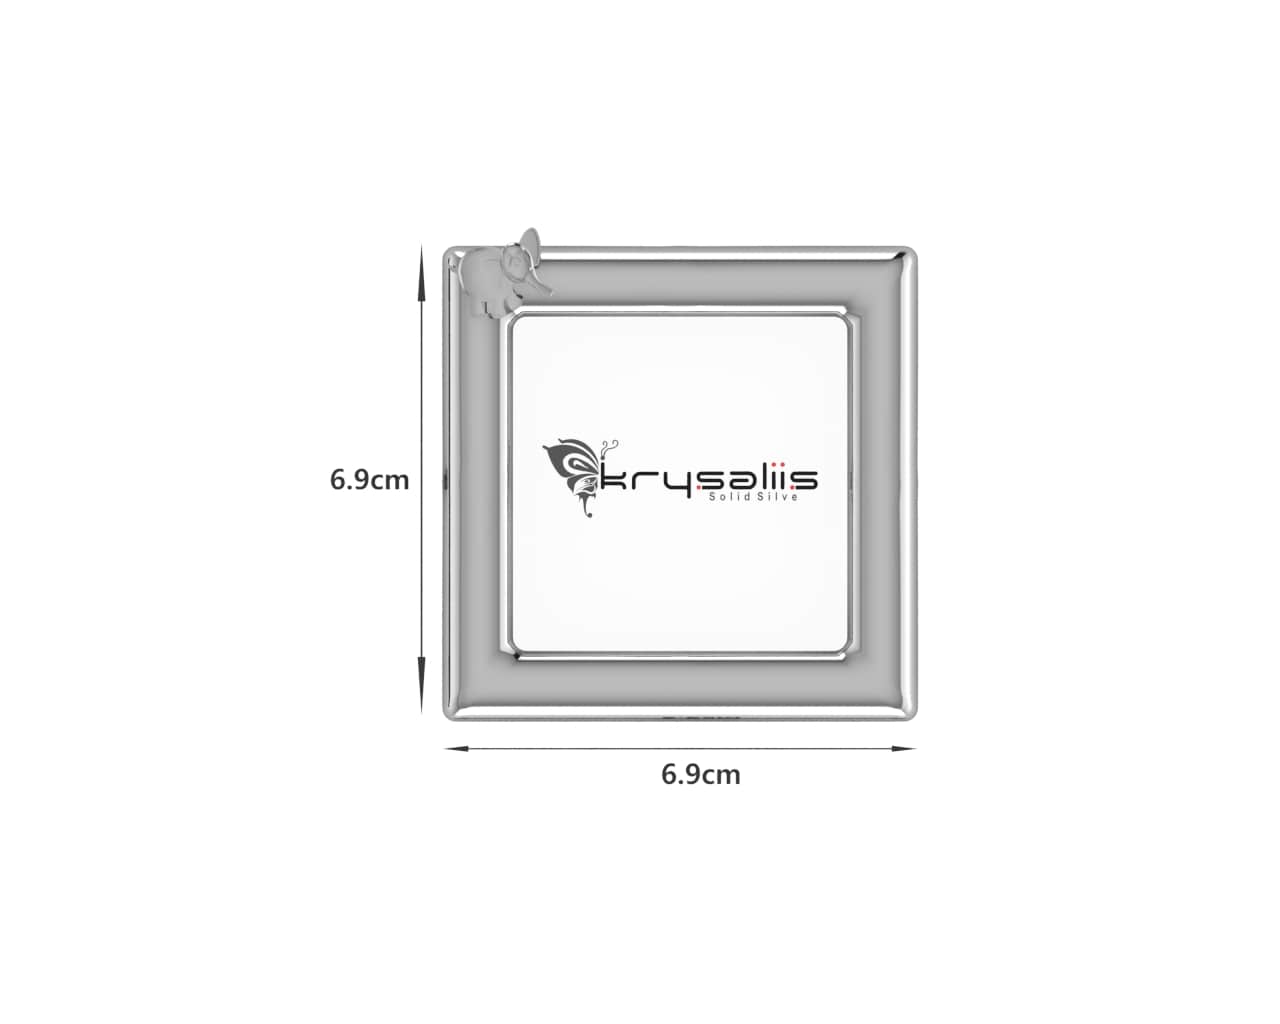 Silver Plated Photo Frame for Baby and Kids - Square with Elephant motif